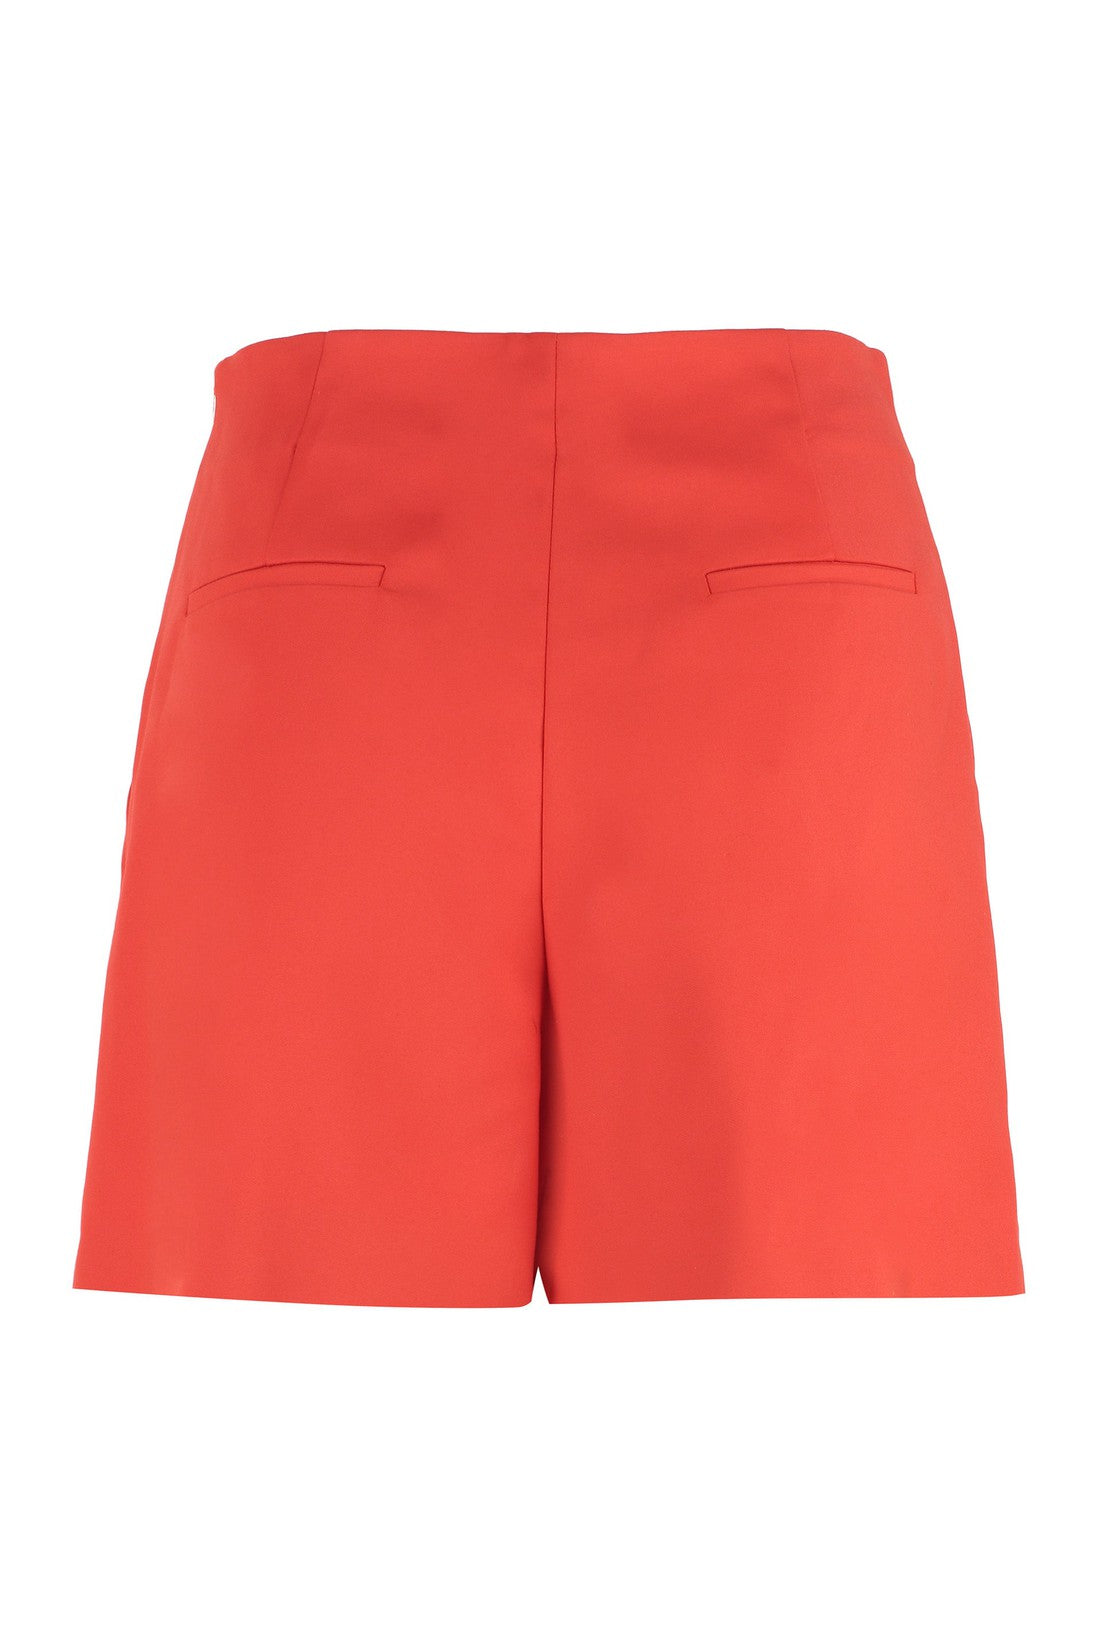 Moschino-OUTLET-SALE-Satin shorts-ARCHIVIST